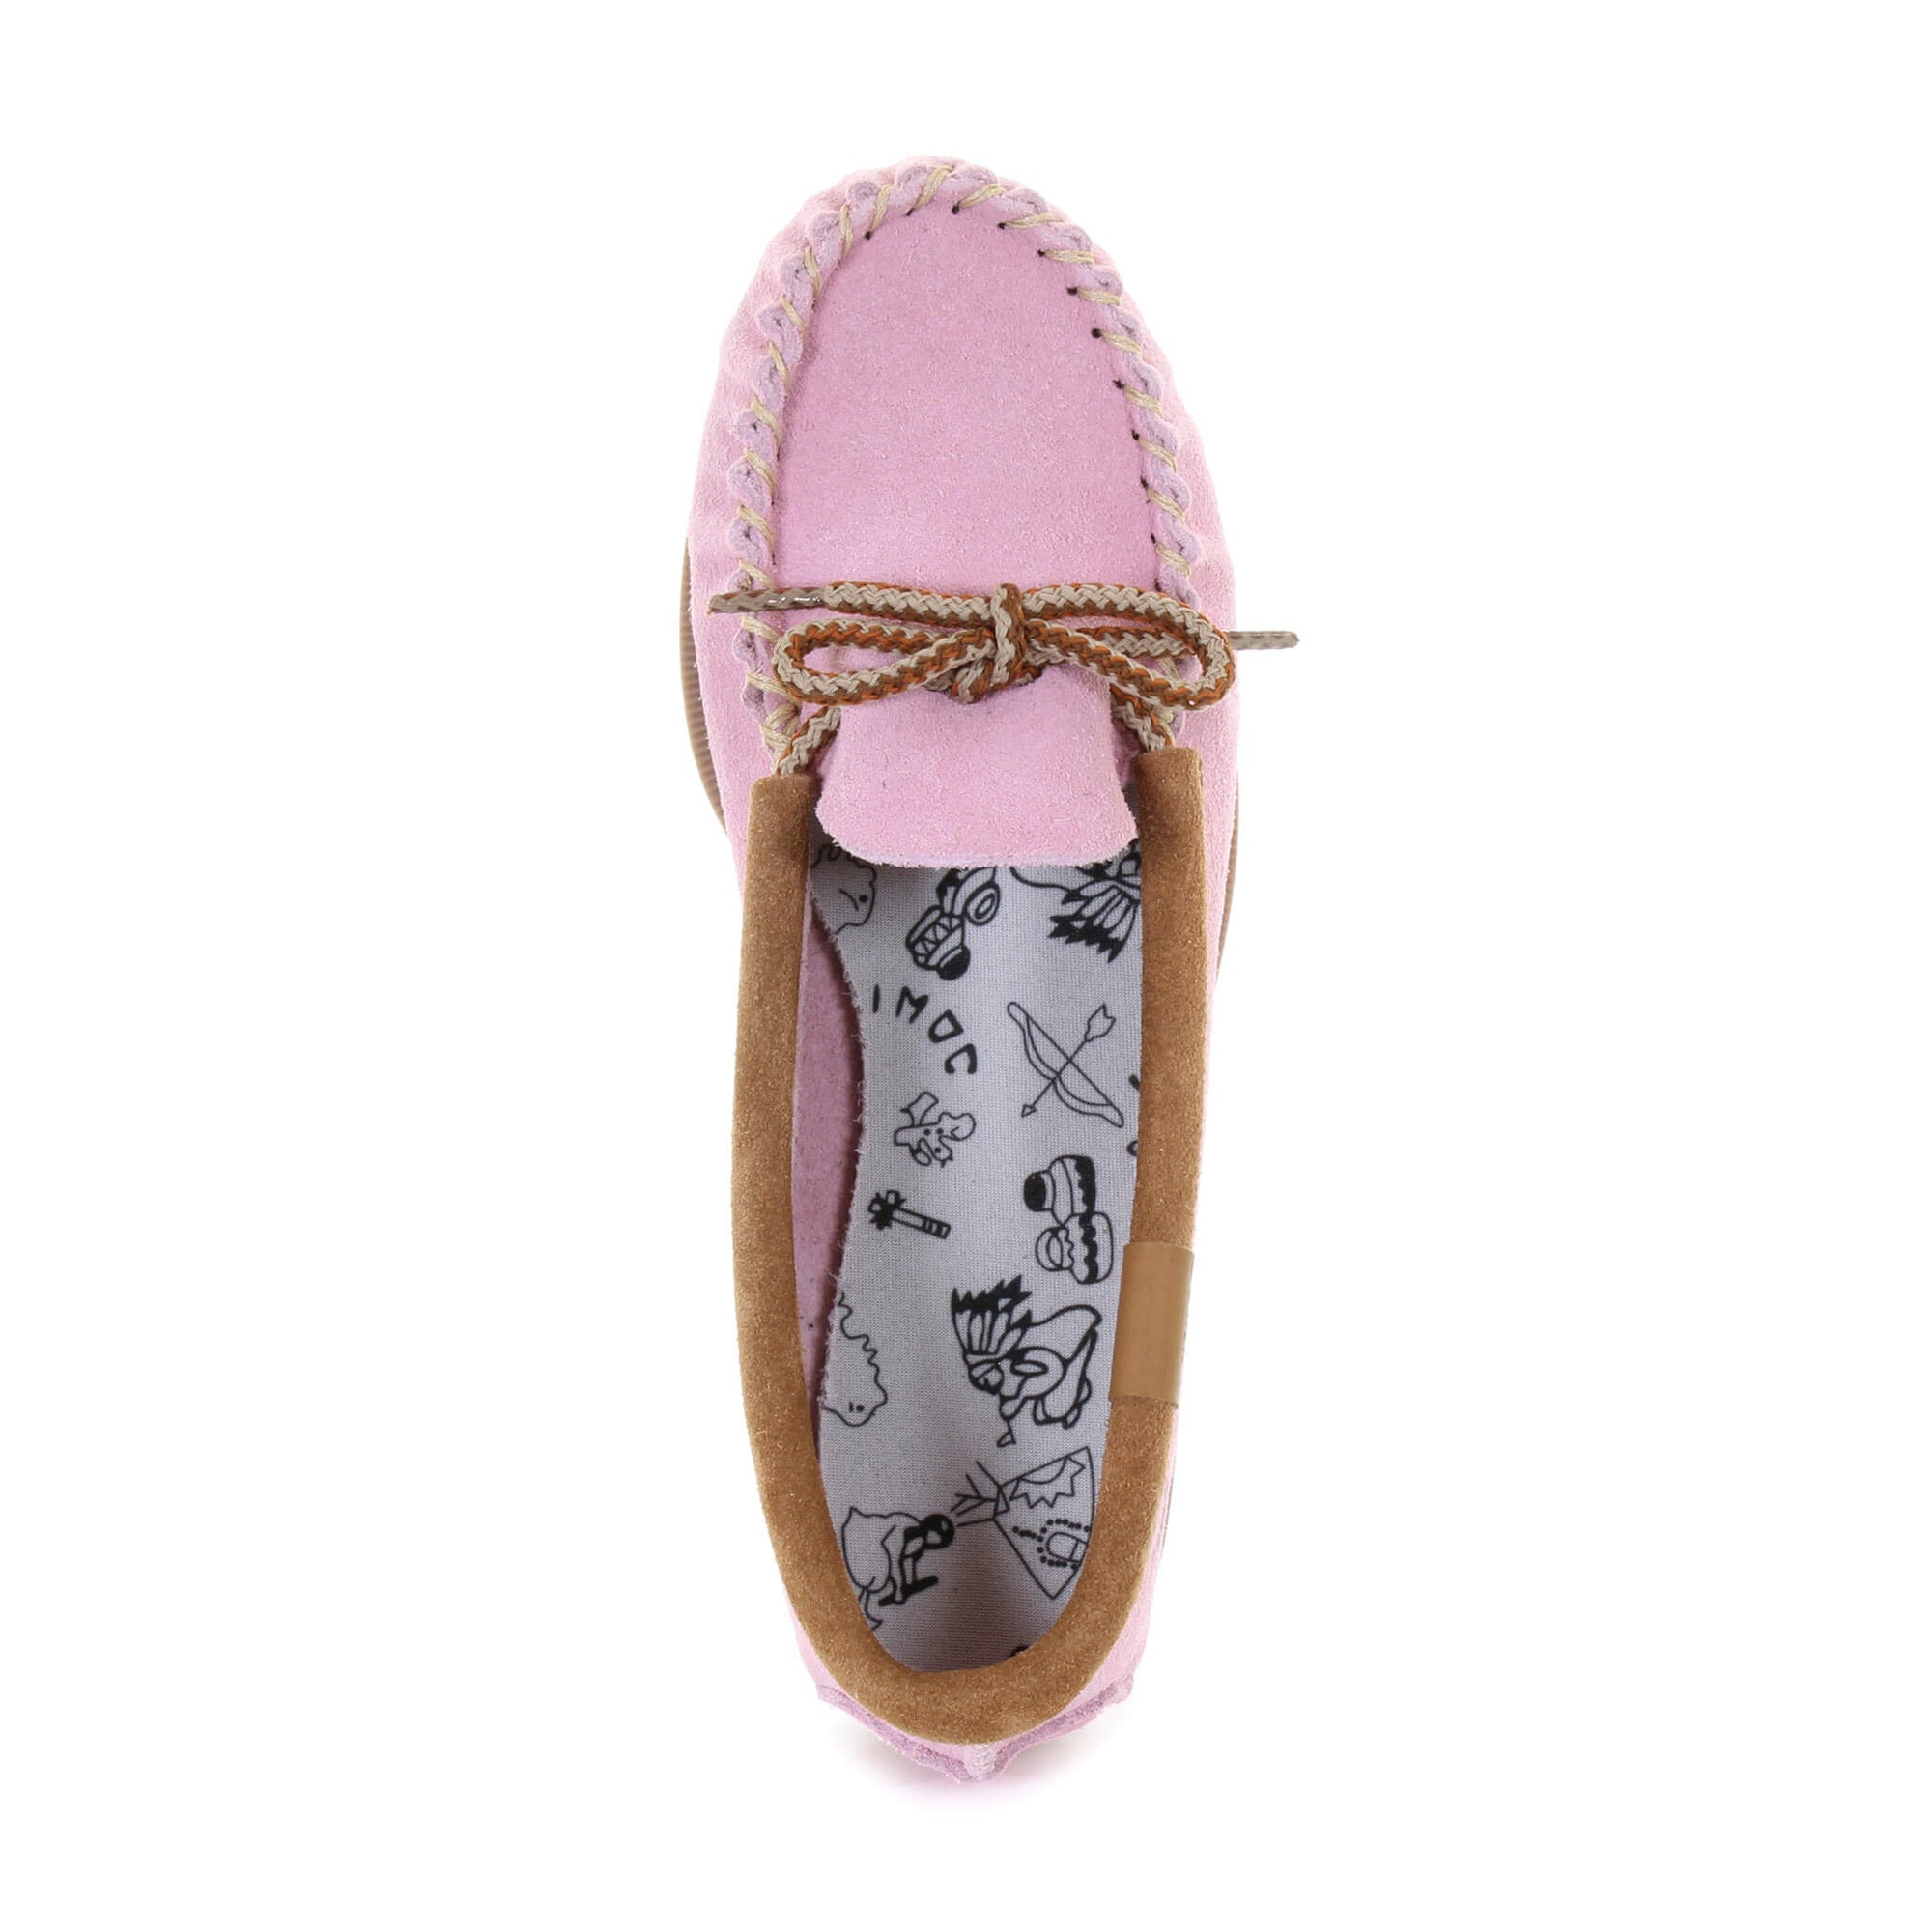 Canada Mocc Pink Moccasin for Women